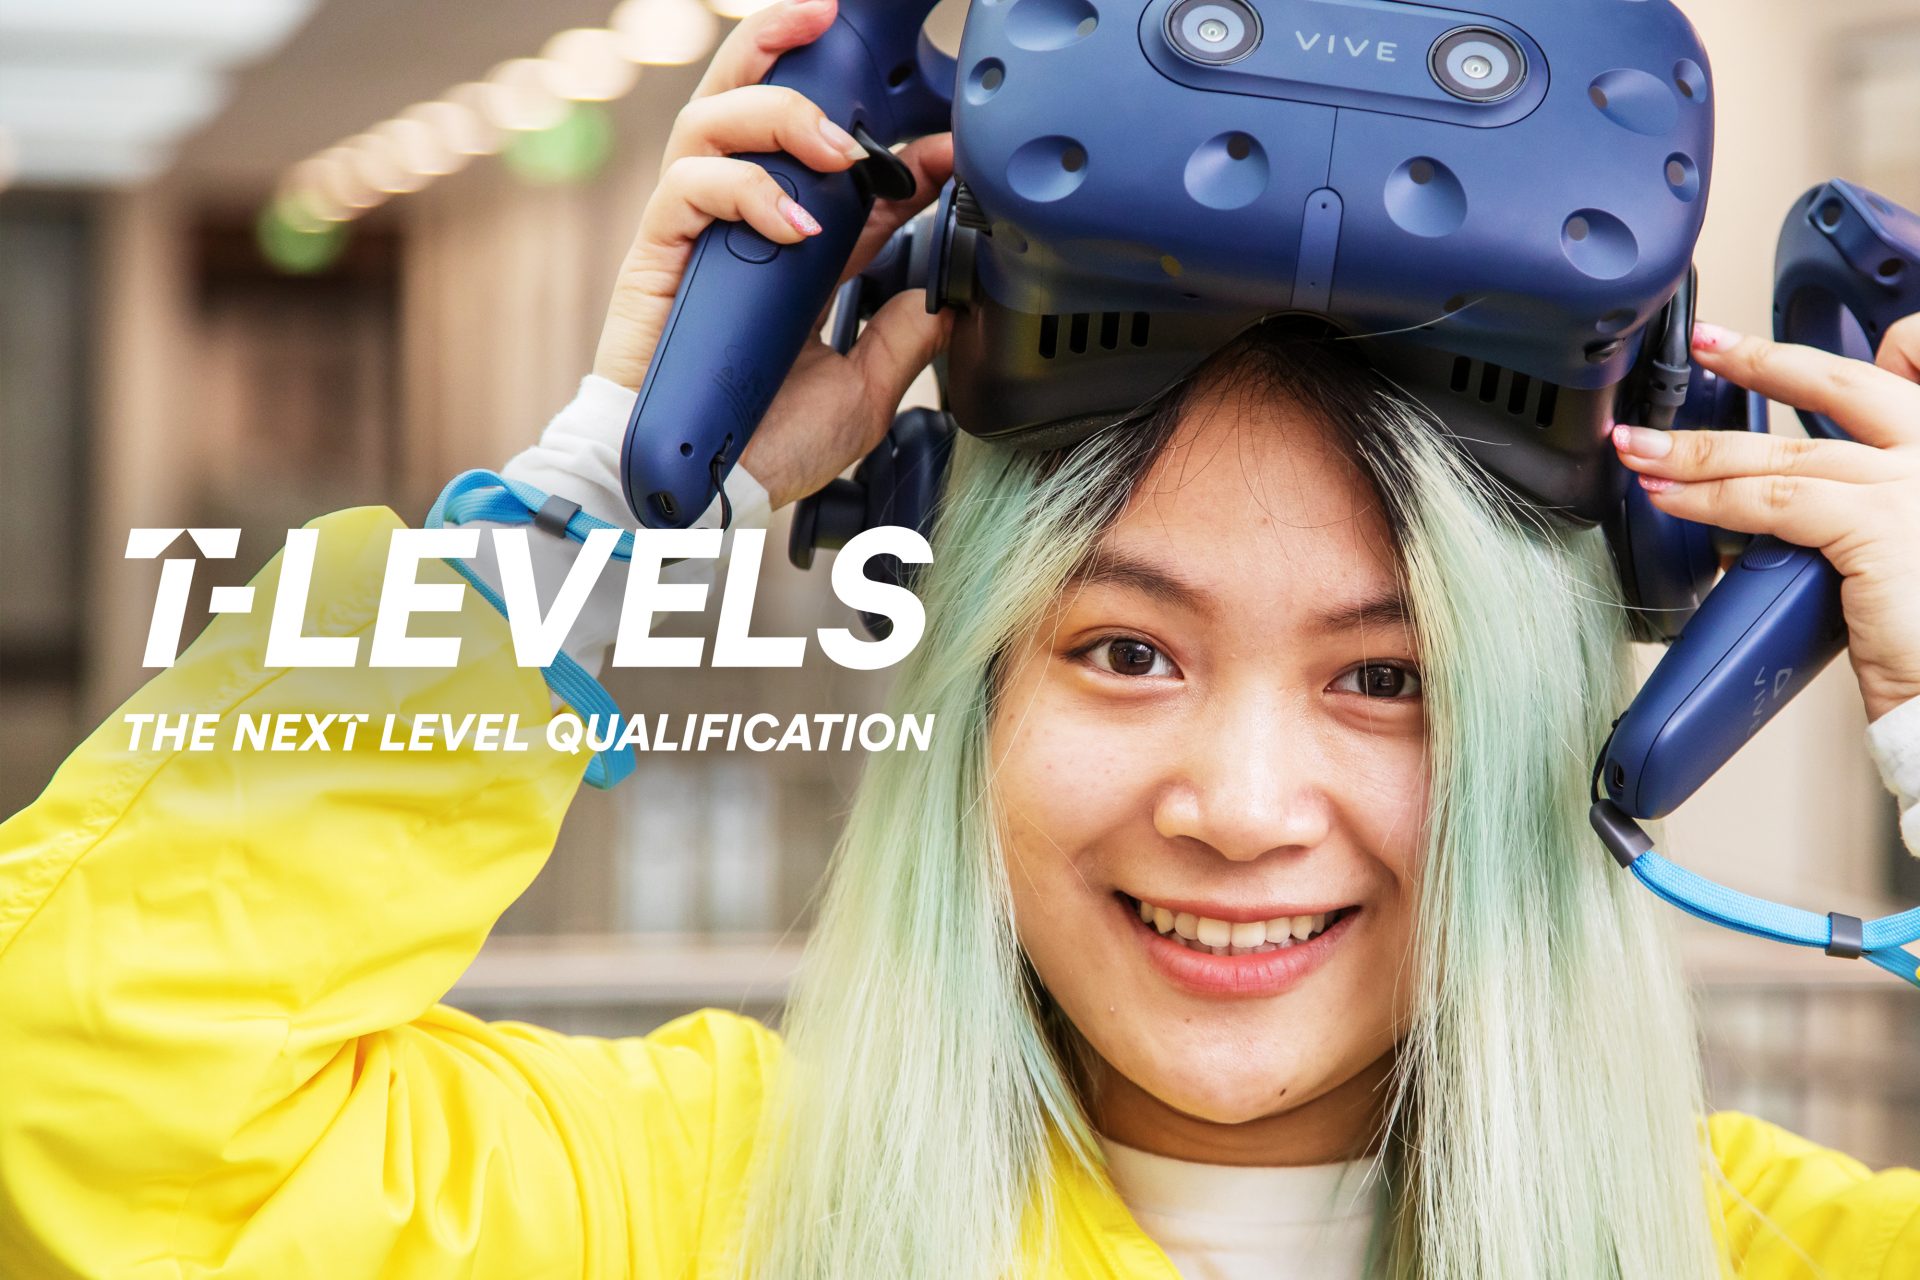 Girl with VR headset on Digital design T Level graphic